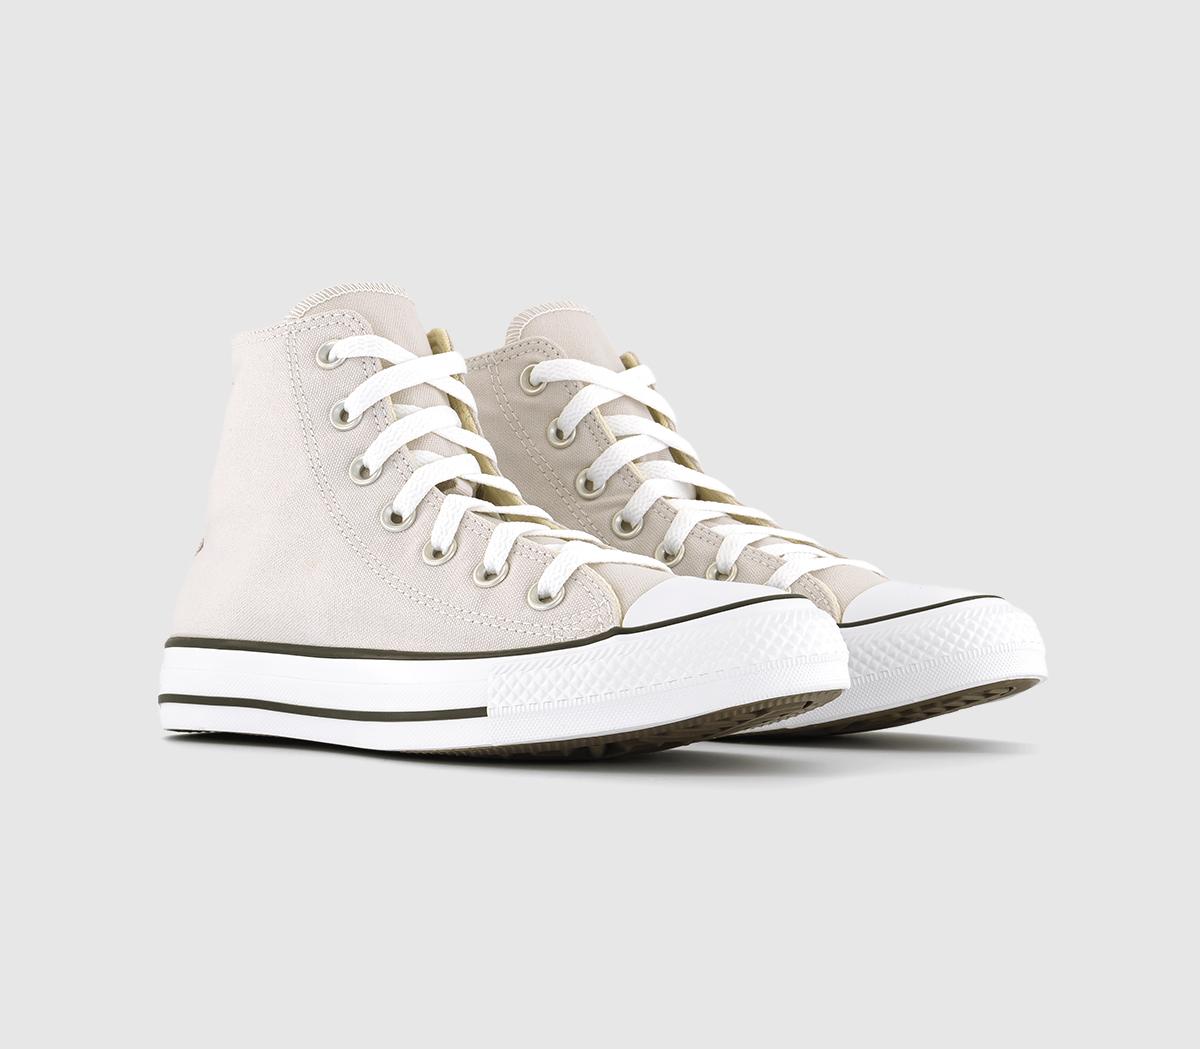 Converse All Star Hi Trainers Pale Putty White Black Natural, 9